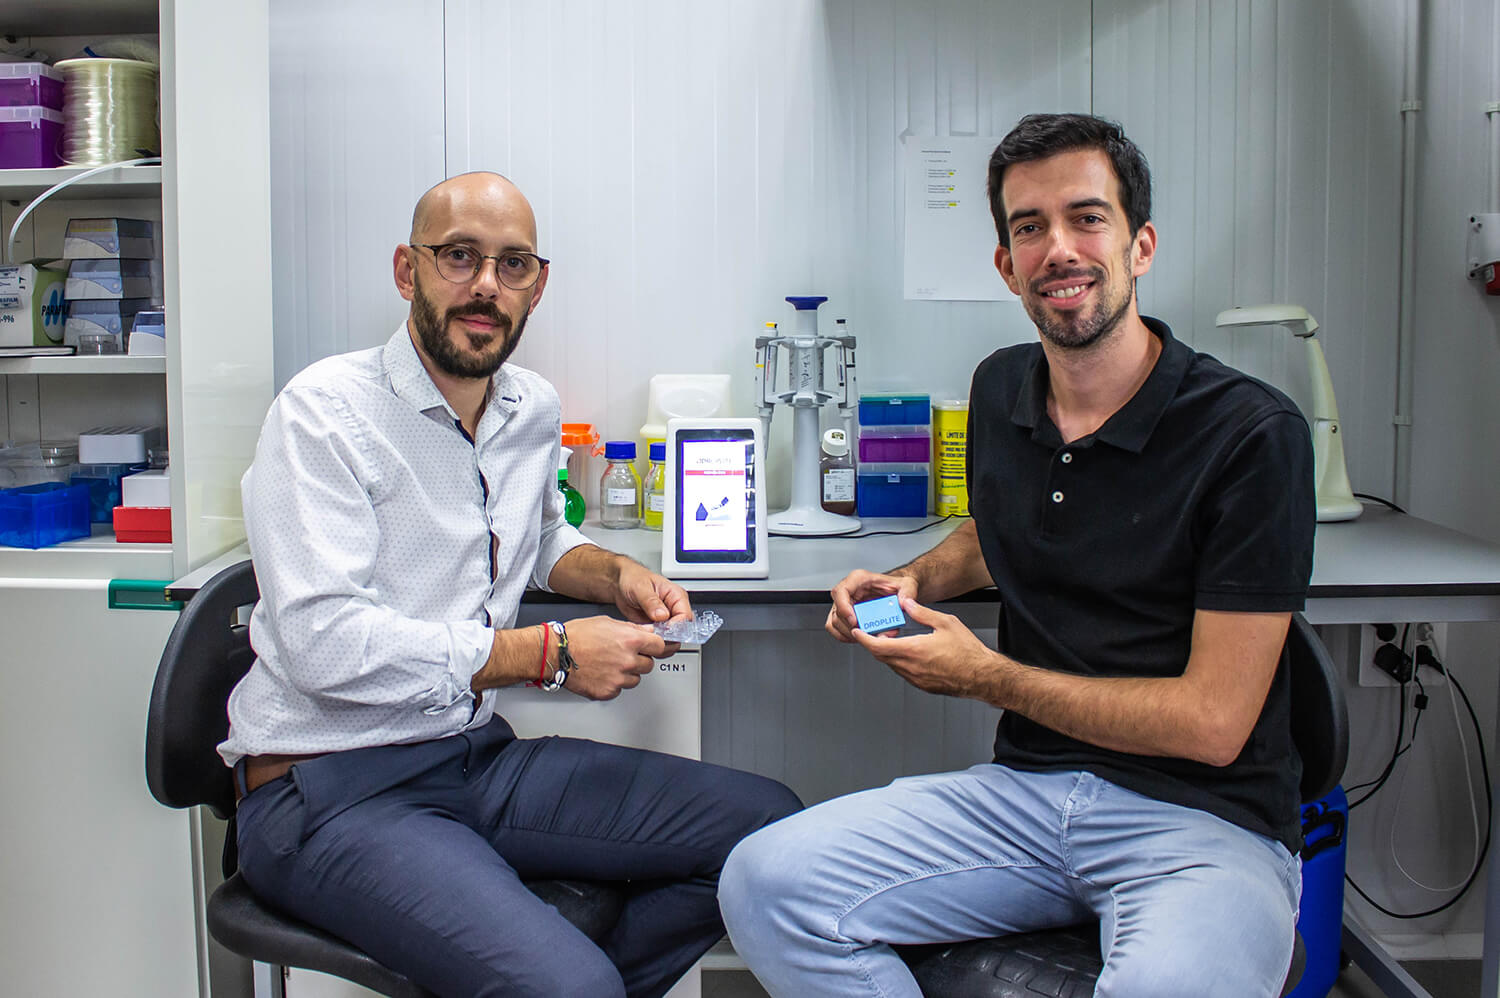 Droplite opens seed round of 600.000€ to accelerate the manufacturing development of its smart medical diagnostics device